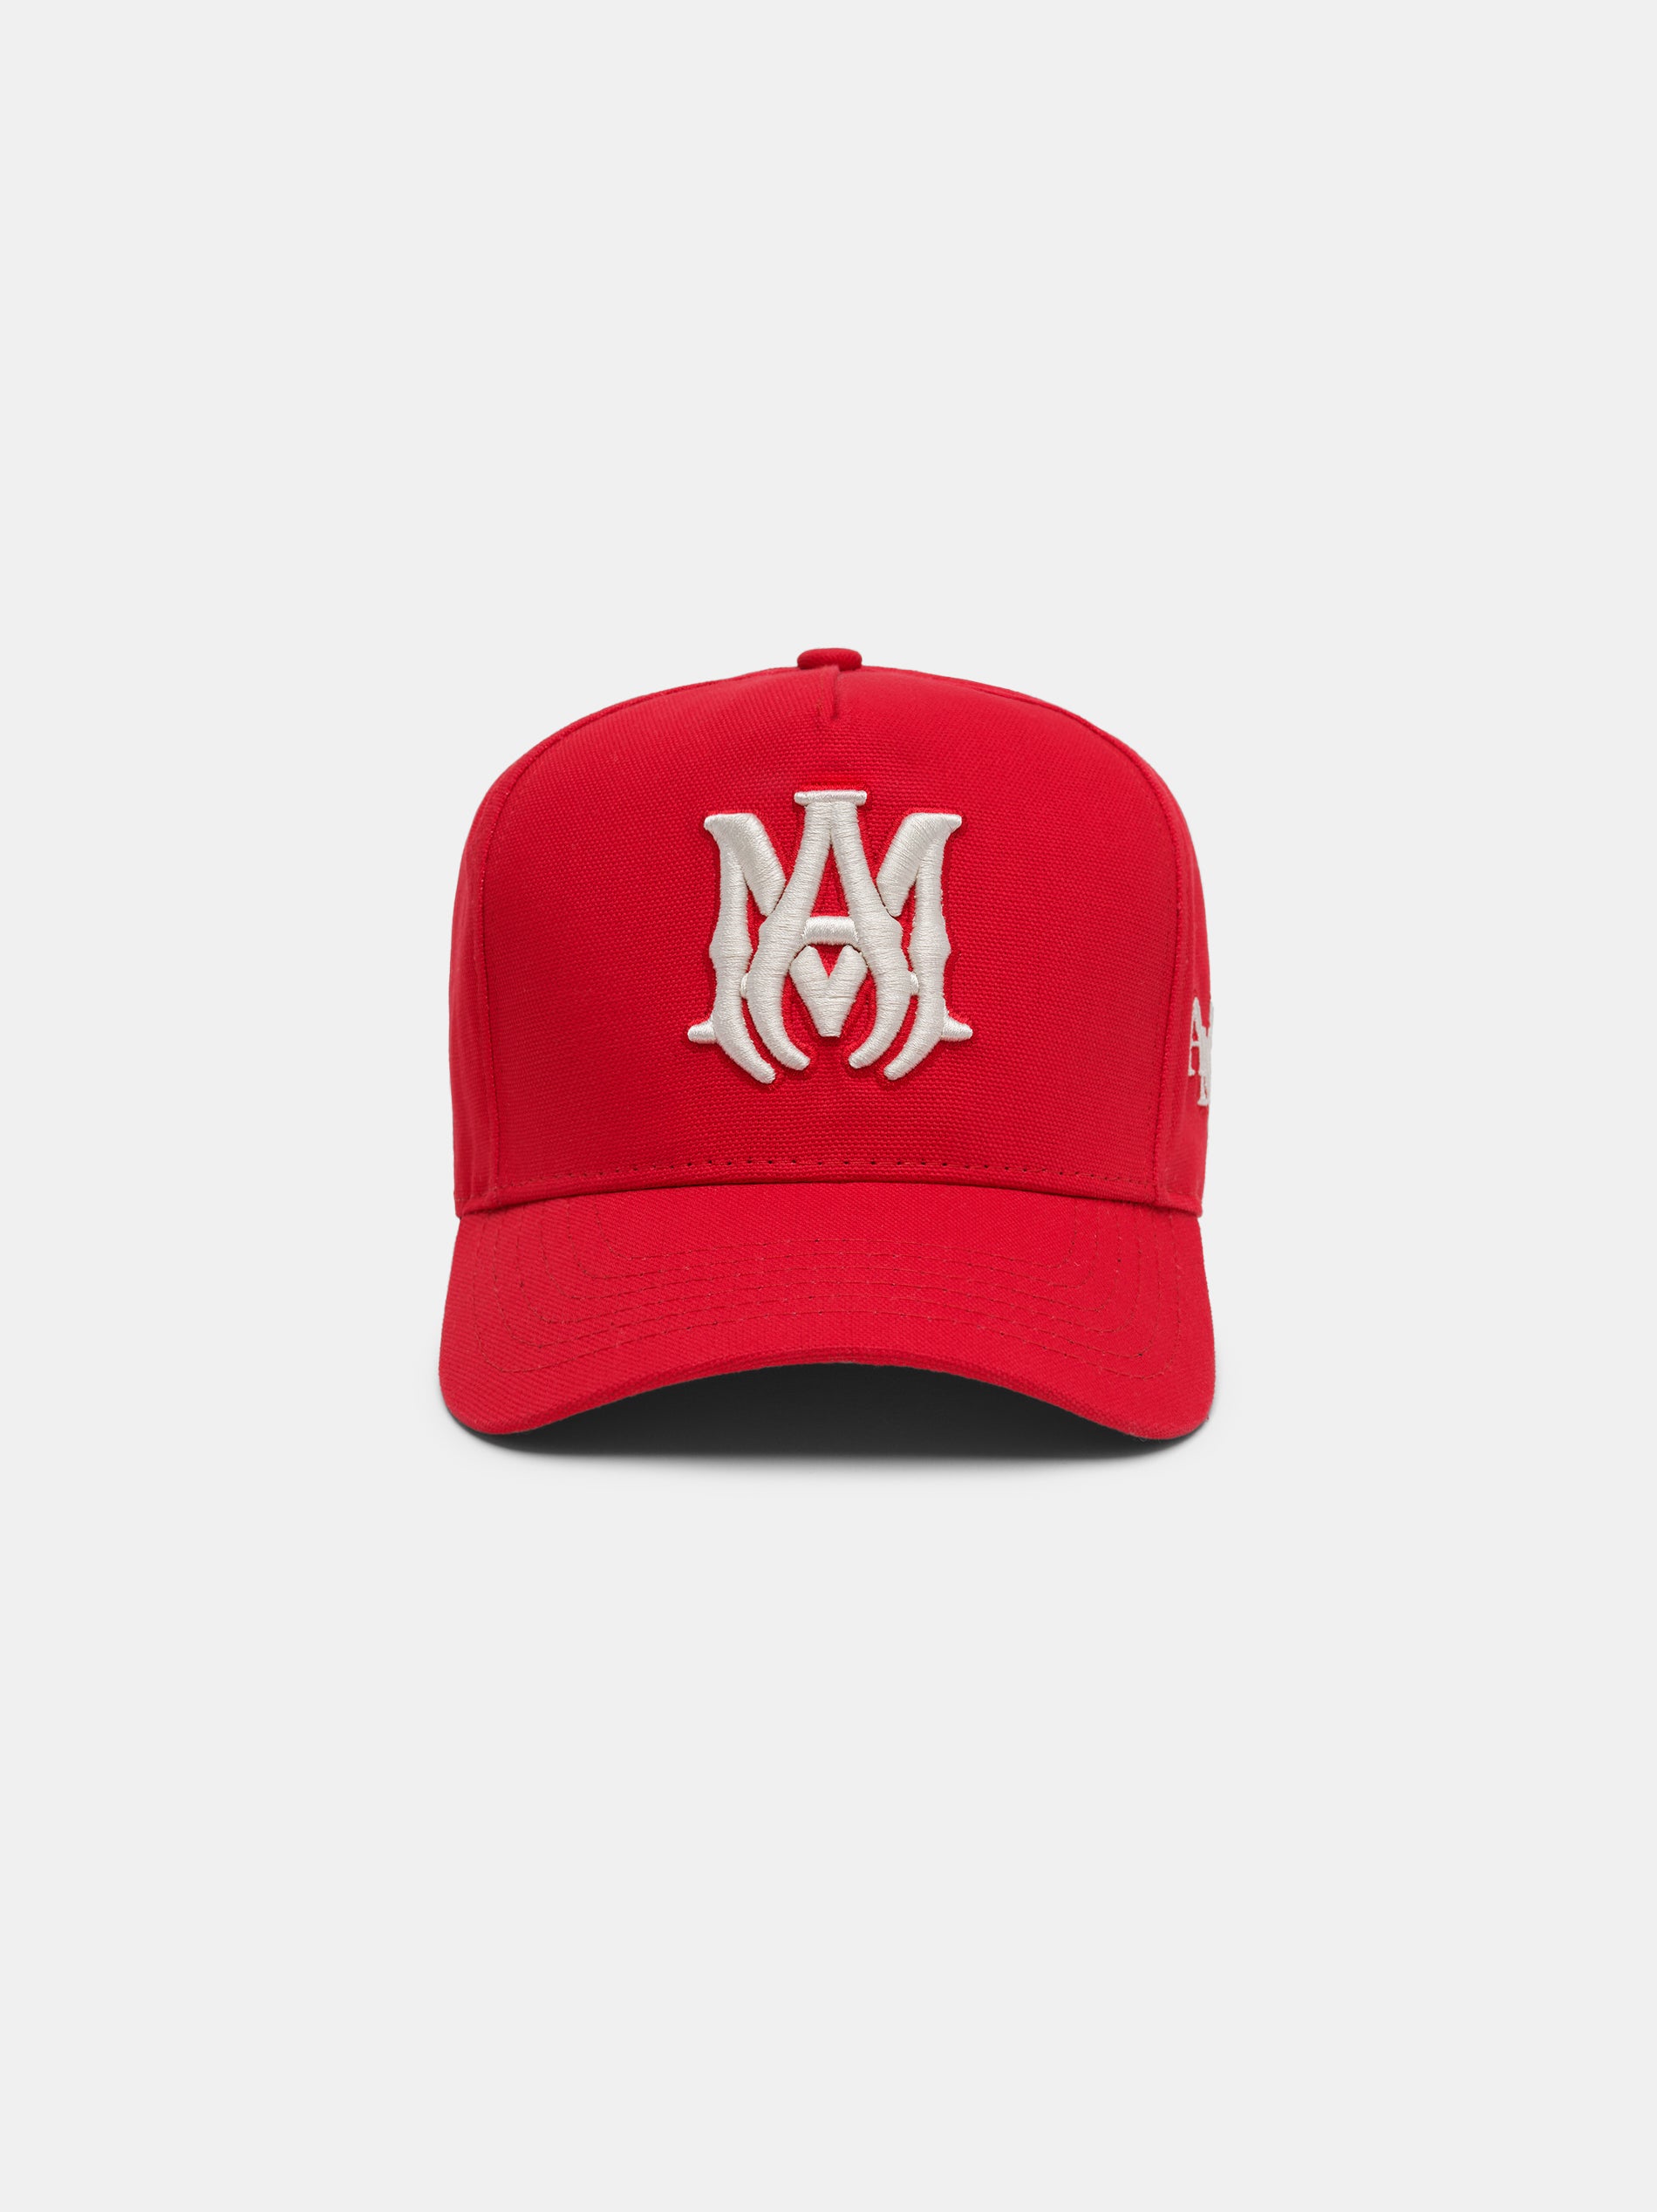 Product MA STAGGERED AMIRI FULL CANVAS HAT - Red featured image